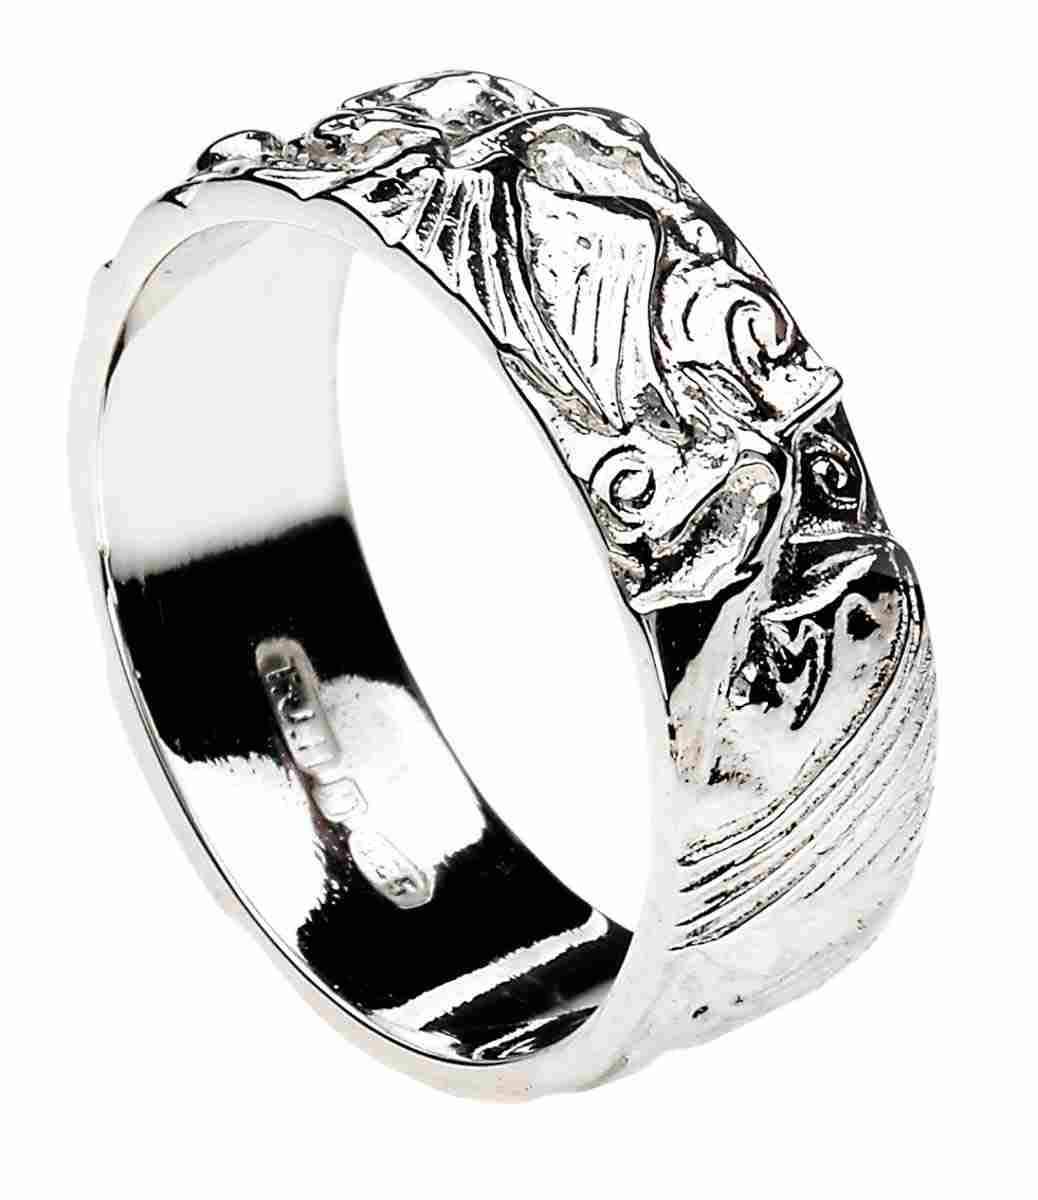 Couple Rings In Silver Online Shopping | Silver Couple Rings Online